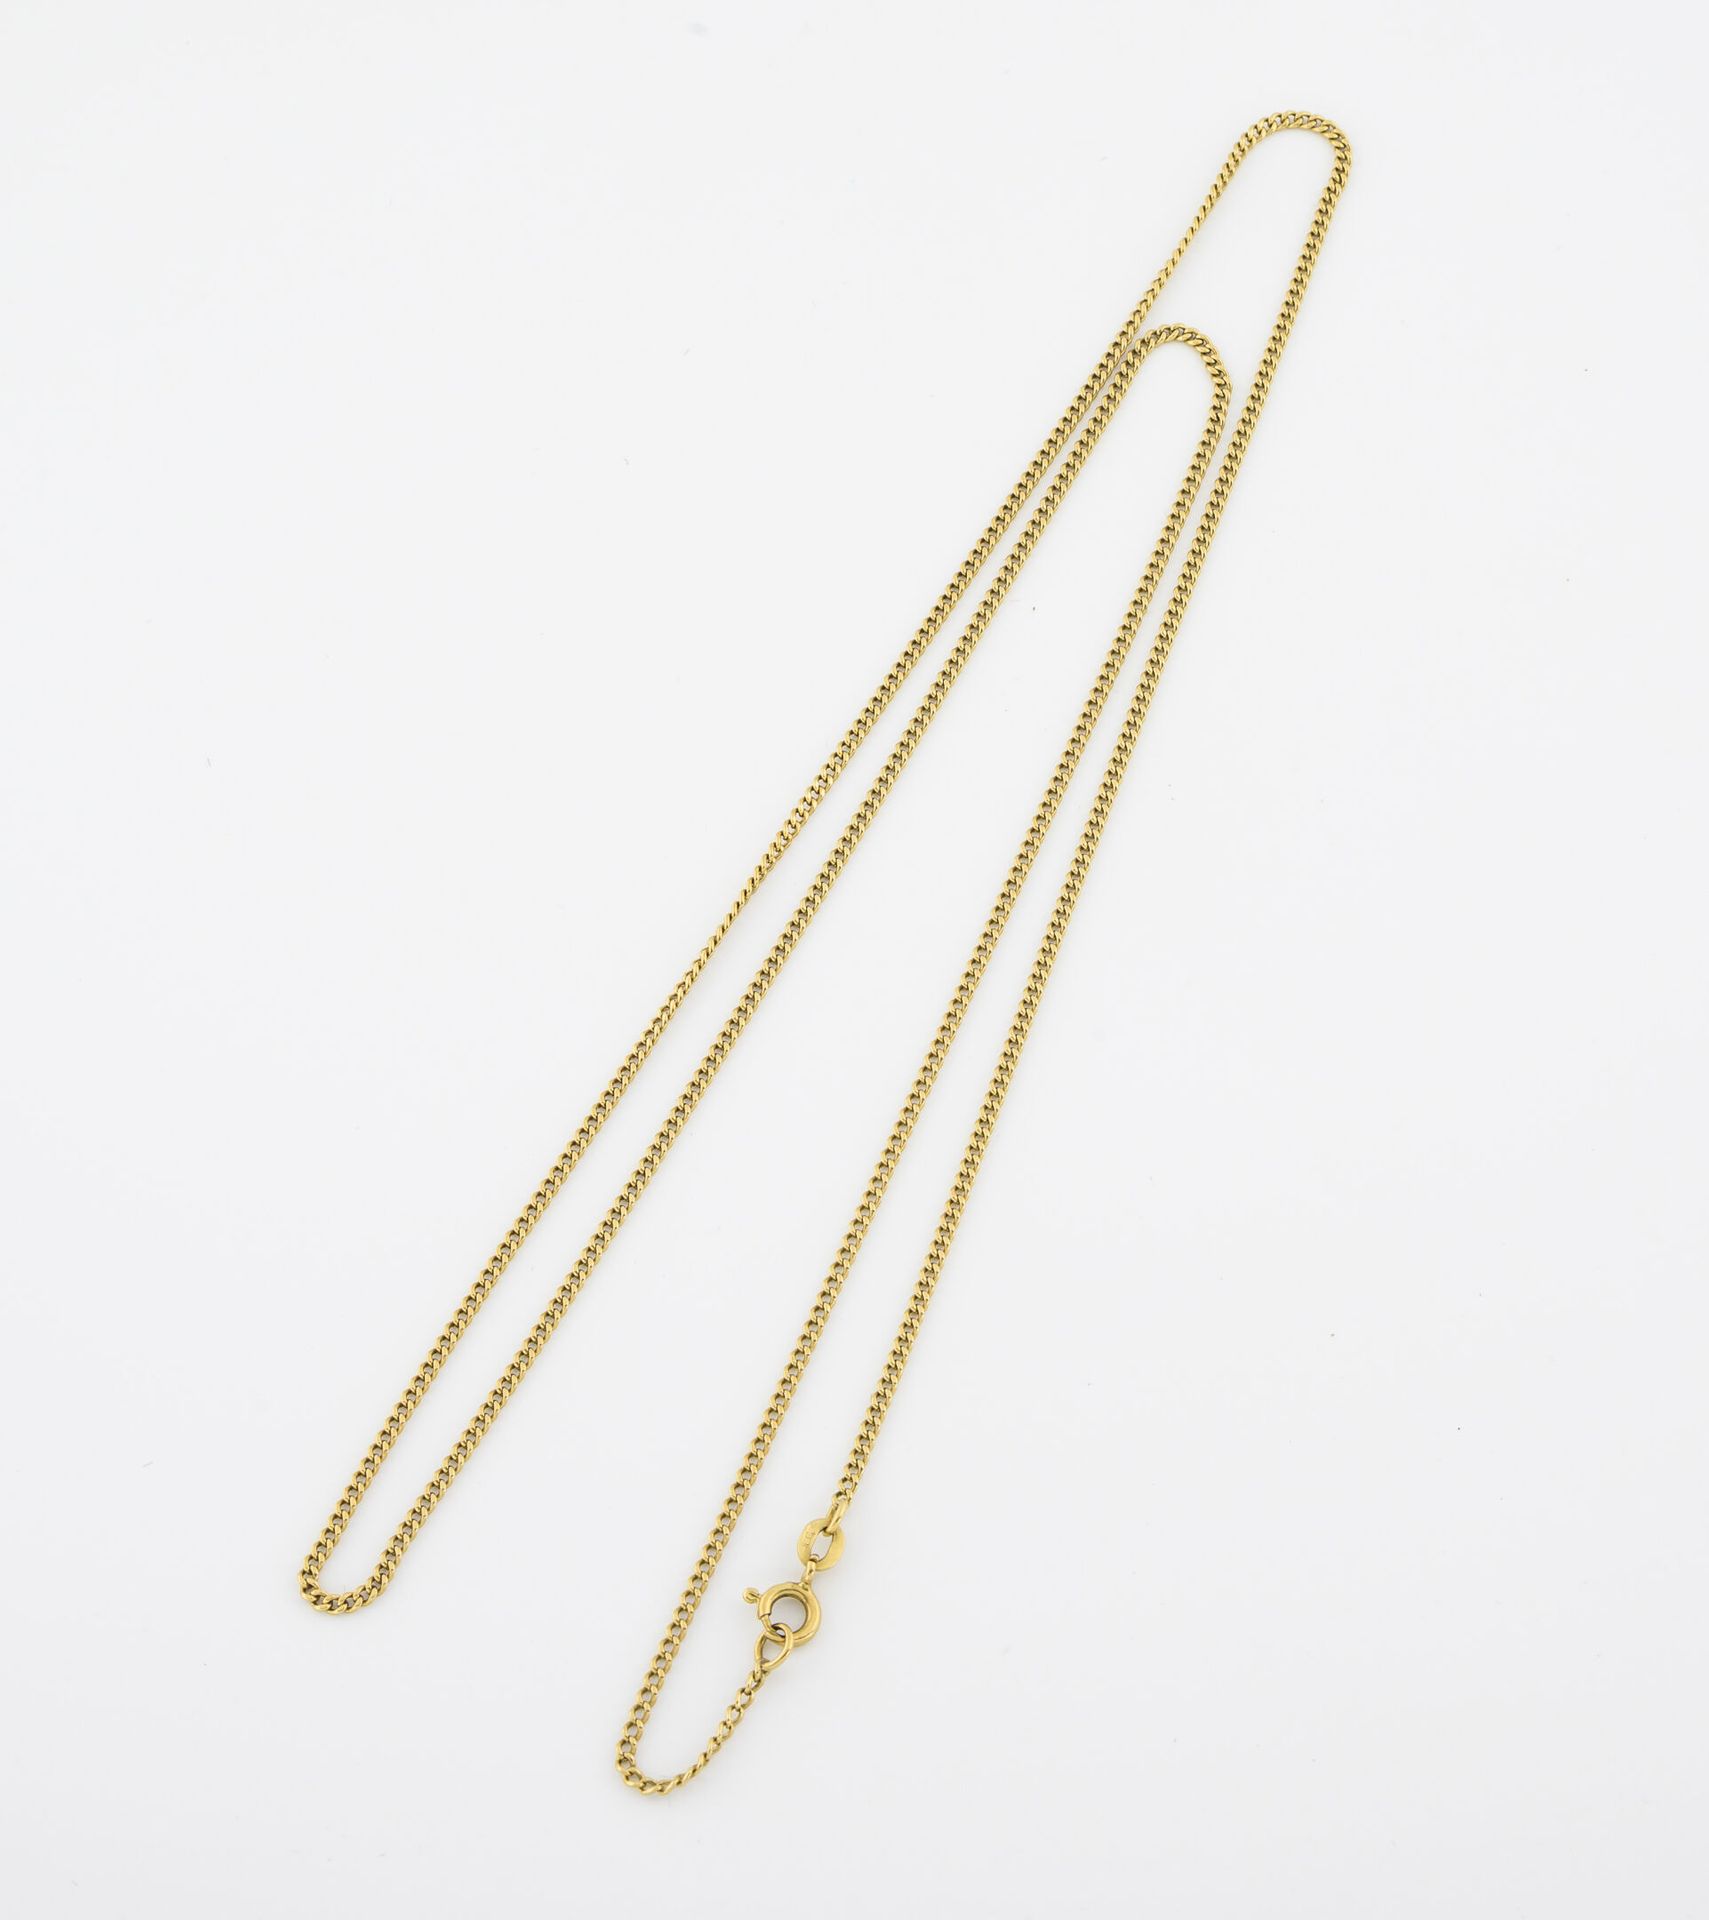 Null Long neck chain in yellow gold (750) with curb chain.

Spring ring clasp. 
&hellip;